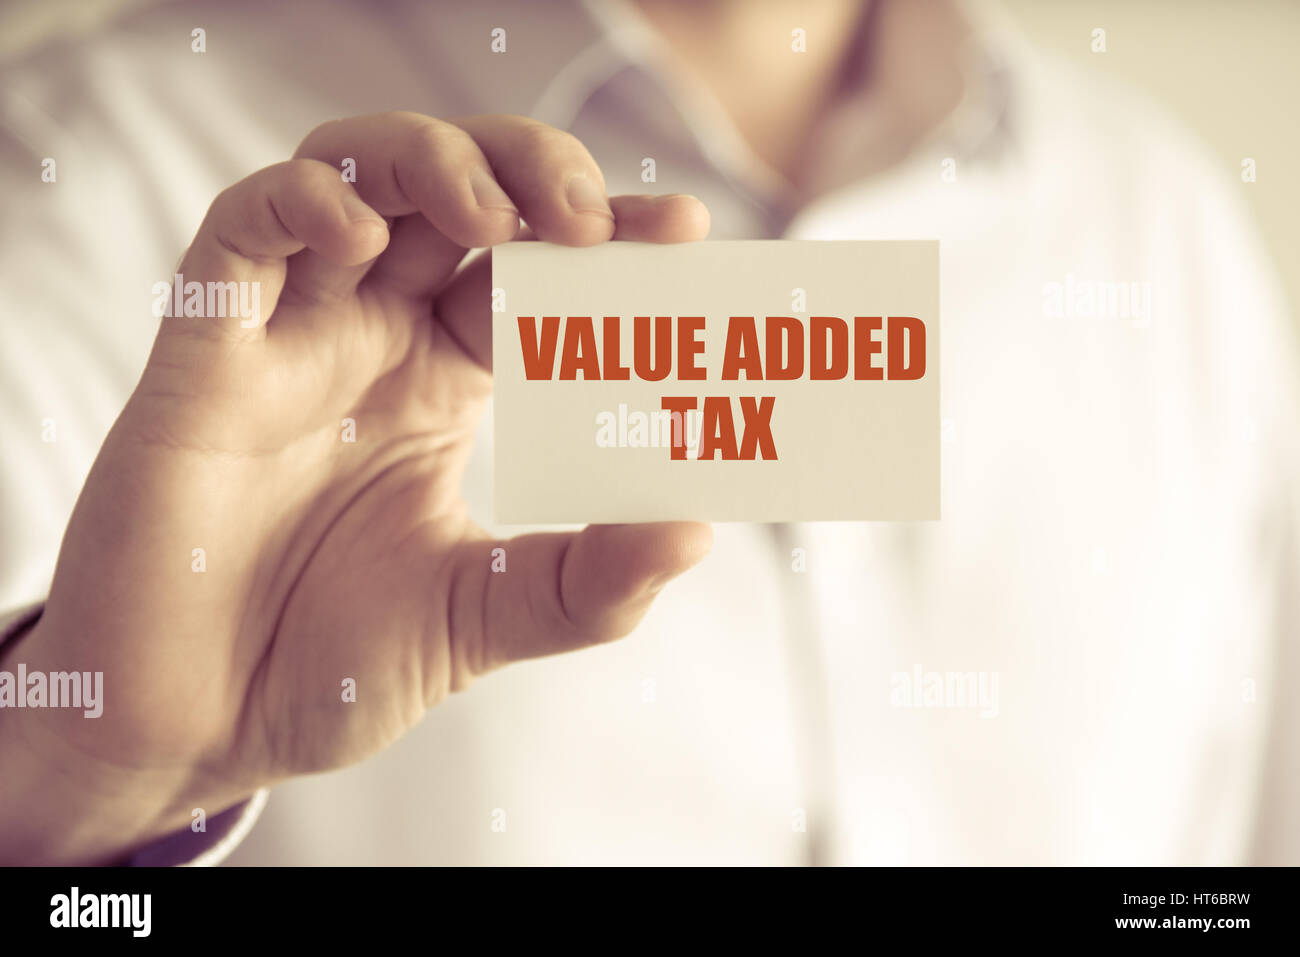 Closeup on businessman holding a card with text VALUE ADDED TAX, business concept image with soft focus background and vintage tone Stock Photo